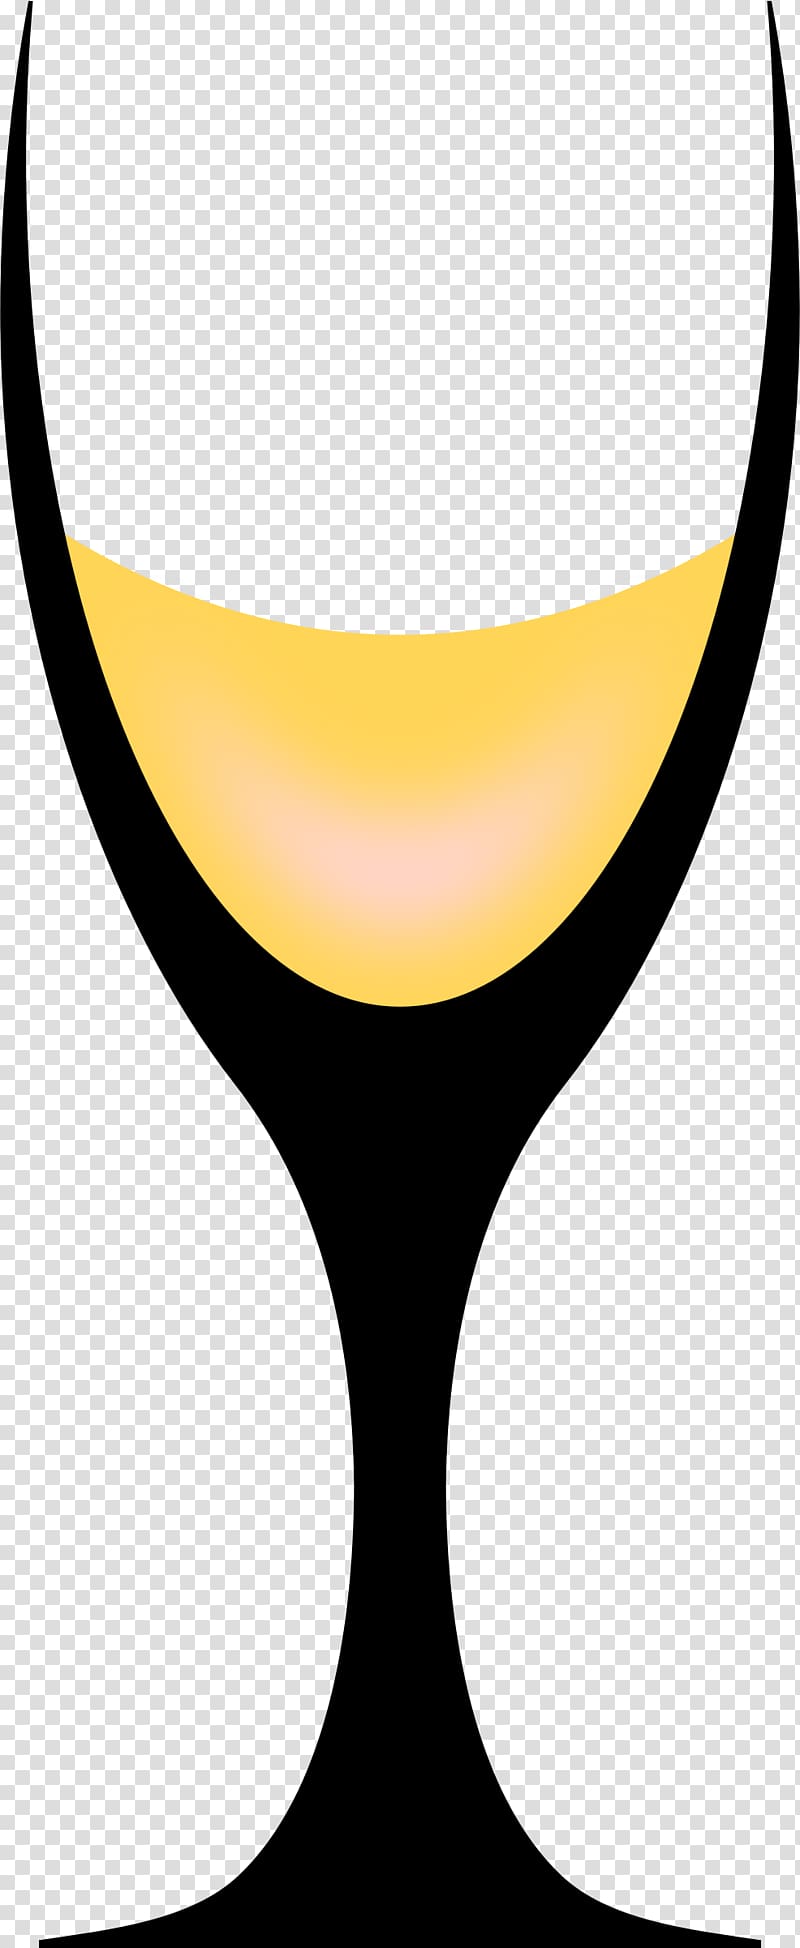 Wine glass Stemware Champagne glass, Wineglass transparent background PNG clipart